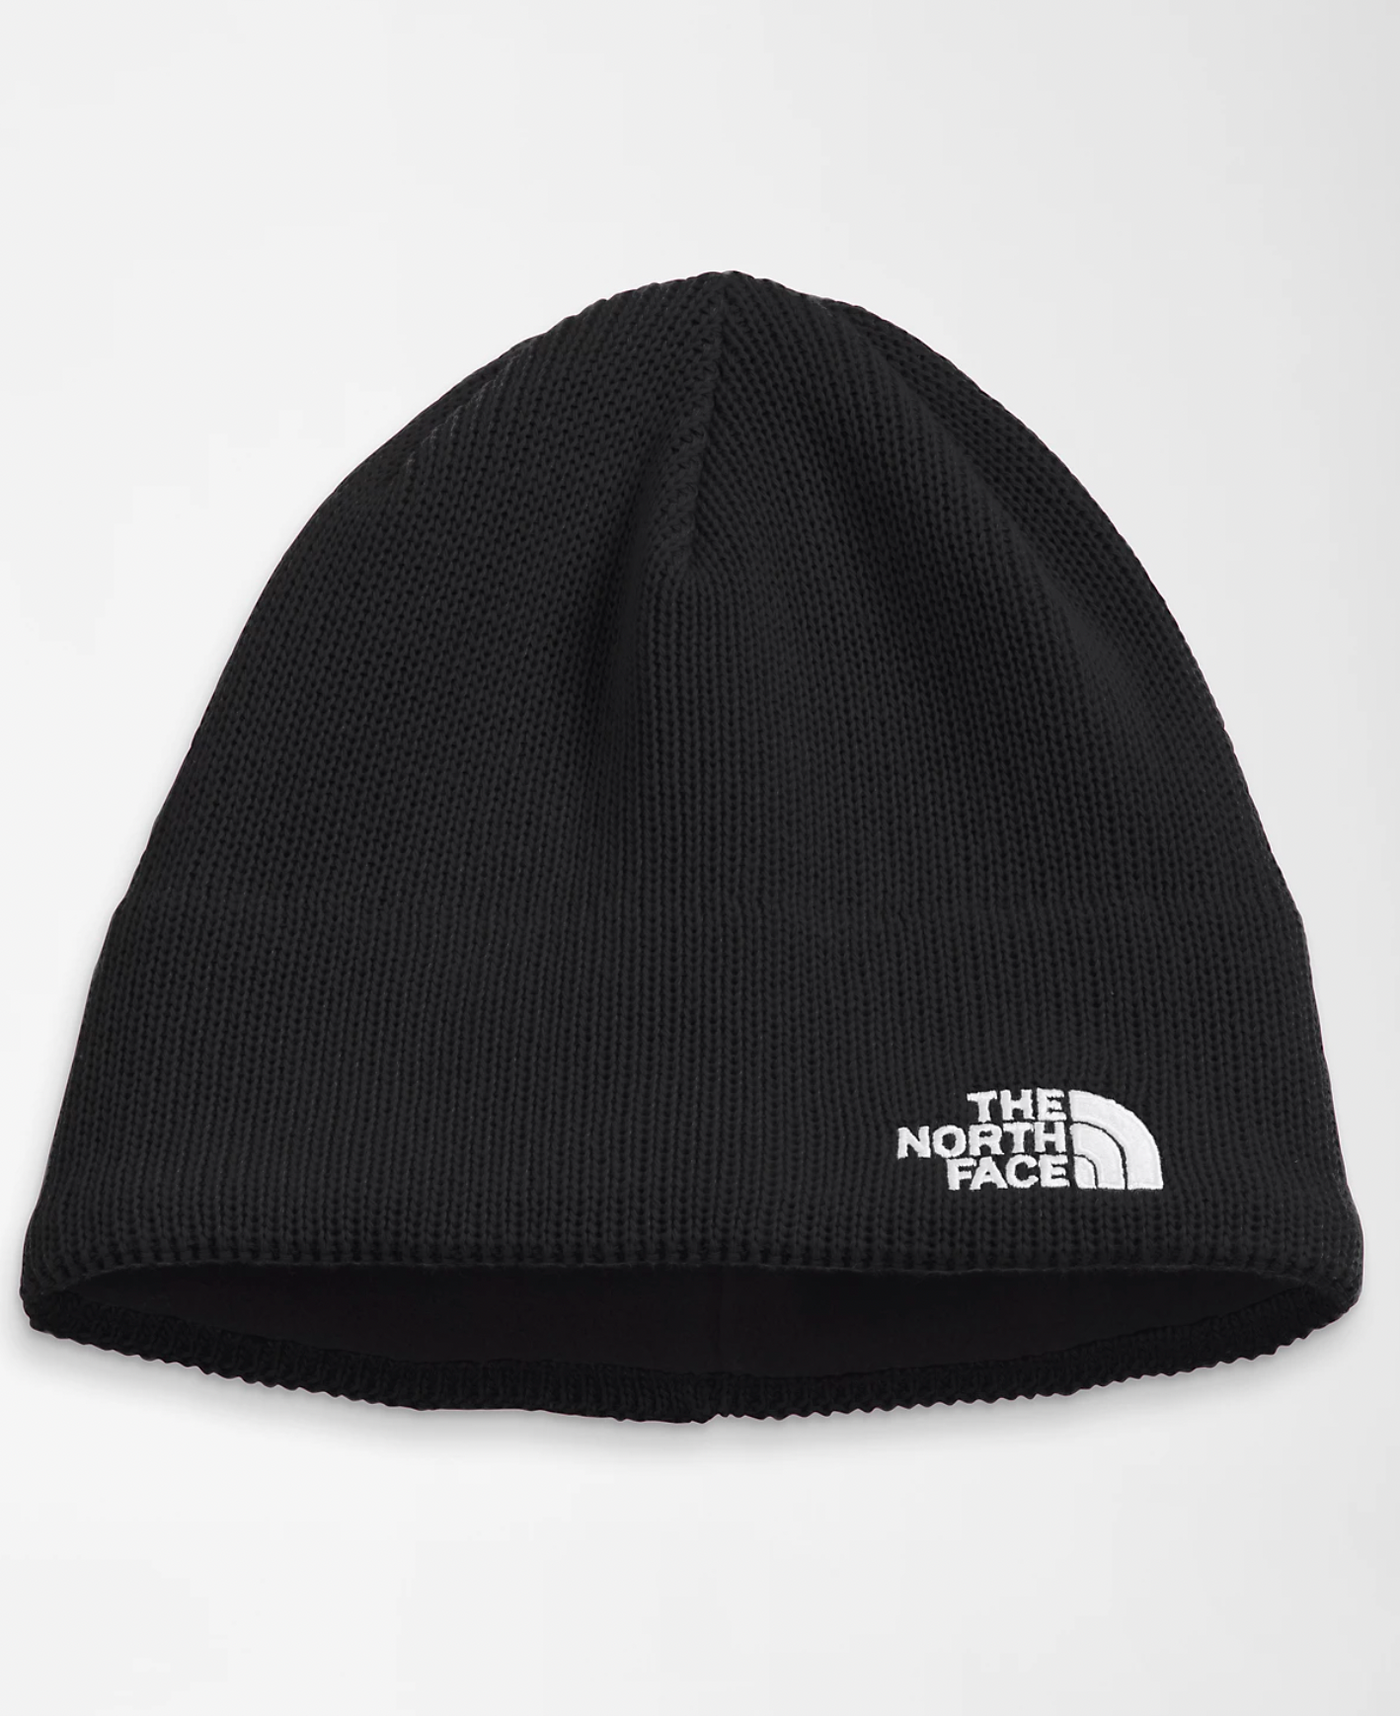 THE NORTH FACE Kids' Bones Recycled Beanie TNF Black